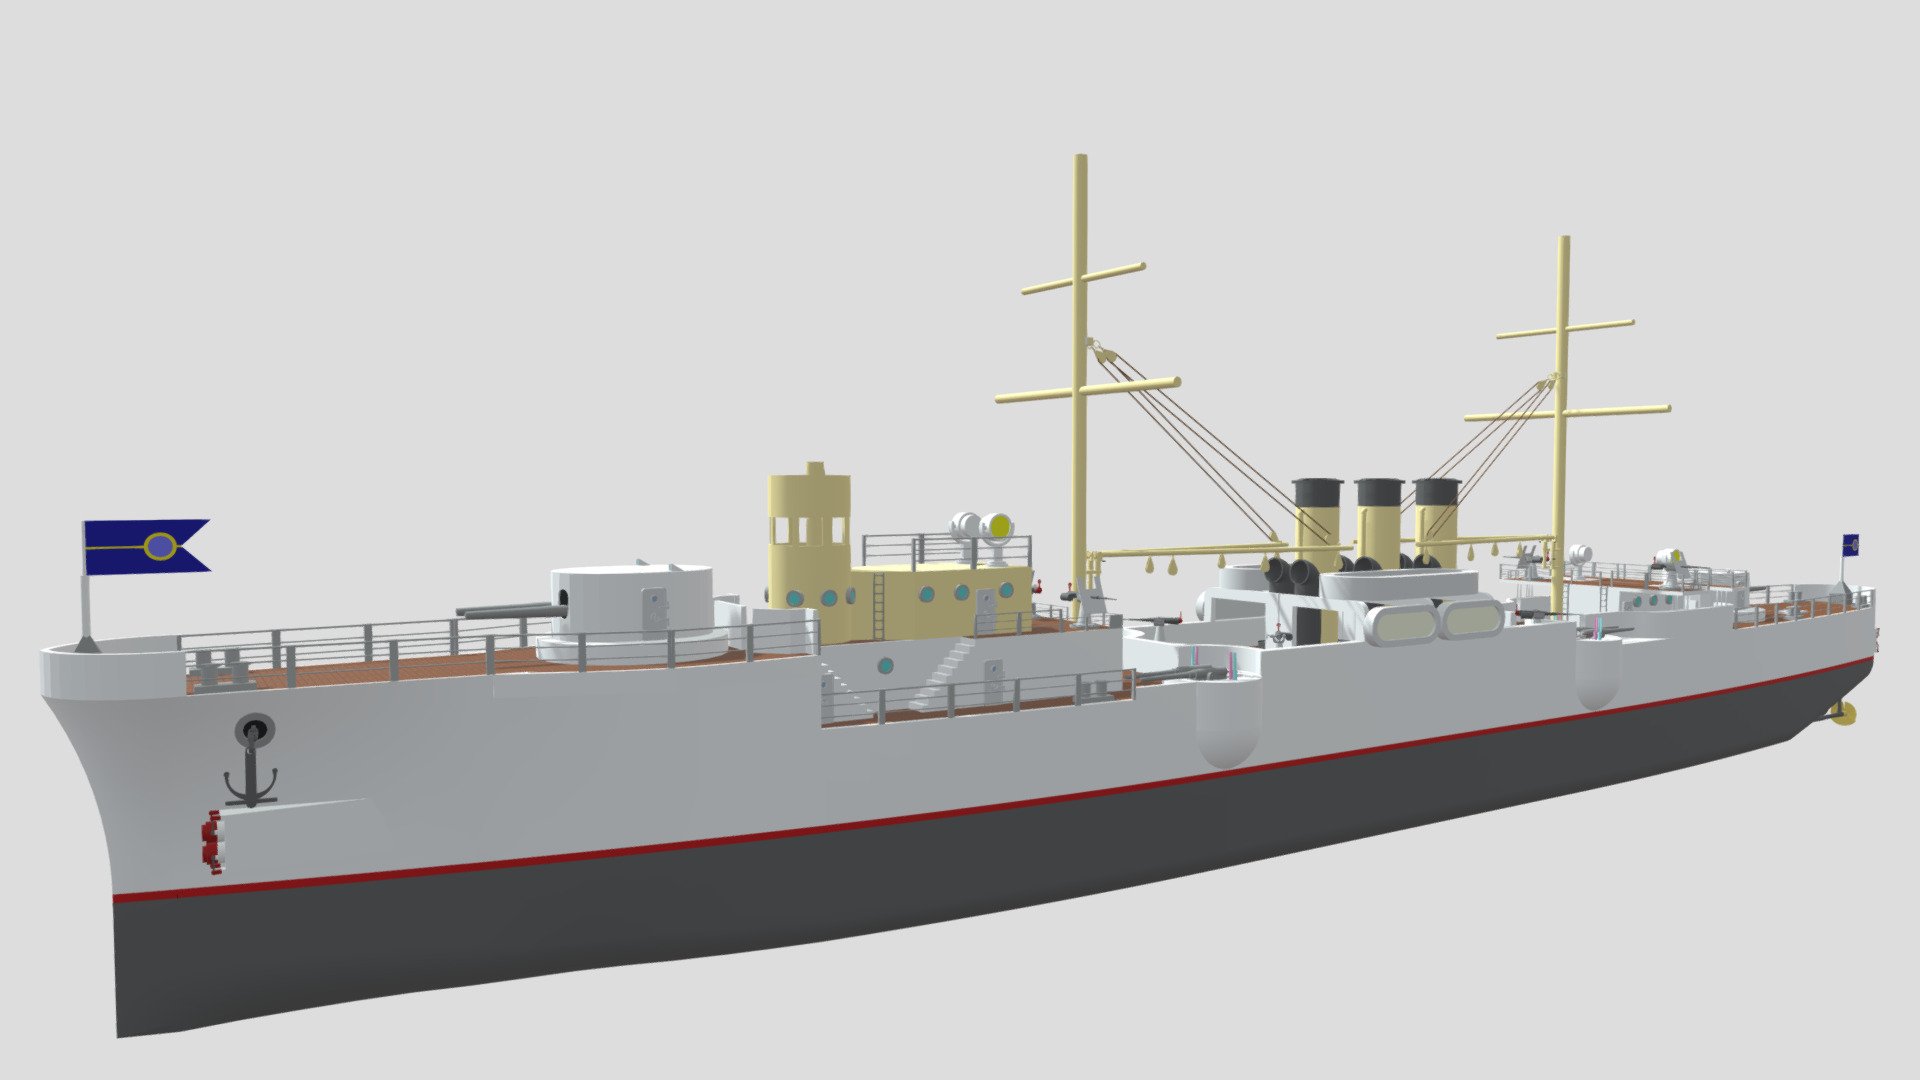 The Aberfan class of cruisers were designed for Searadias coastal defence squadrons,and for their scouting squadrons. In total 10 were built alongside the Cait class cruisers in 1896, thus in doing so hogged nearly all of the larger state run shipyards for 5 years, leaving only a few commercial based yards available.At full load the Aberfans could weigh up to 3300 tonnes with enough coal to serve them for 4000 km,however the standard load was often around 3120 tonnes.They came fitted with 8- 450mm torpedo launchers and 4-120mm main guns,though also came equiped with 8-76mm open barbette guns and some 20mm machine guns spread around the ship.The open barbettes being an experiment to see how turreted secondaries worked out,without the added weight of a full on turret.The engines delivered 5180 horsepower,giving a top speed of 17.5 knots.Armour wise they came with a 50mm boxed citadel with 20mm protecting the rest 3d model